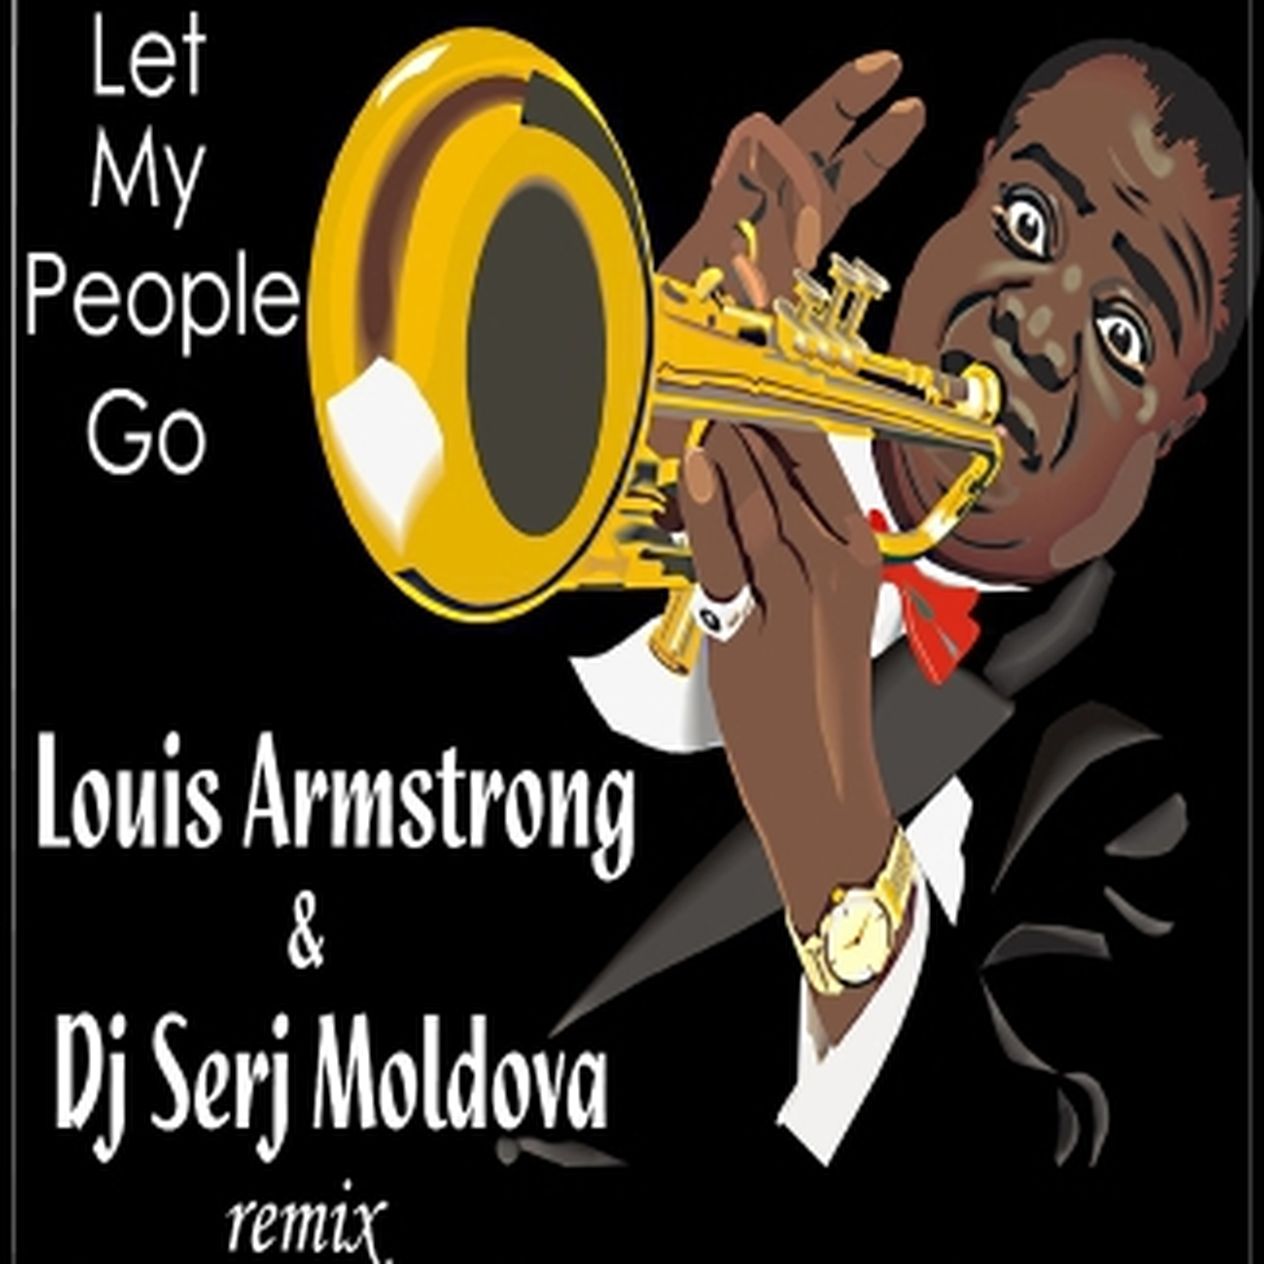 Let my people go текст. Луи Армстронг Let my people go. Луи Армстронг лет май. Спиричуэл Louis Armstrong – “Let my people go”.. Летс май пипл го.